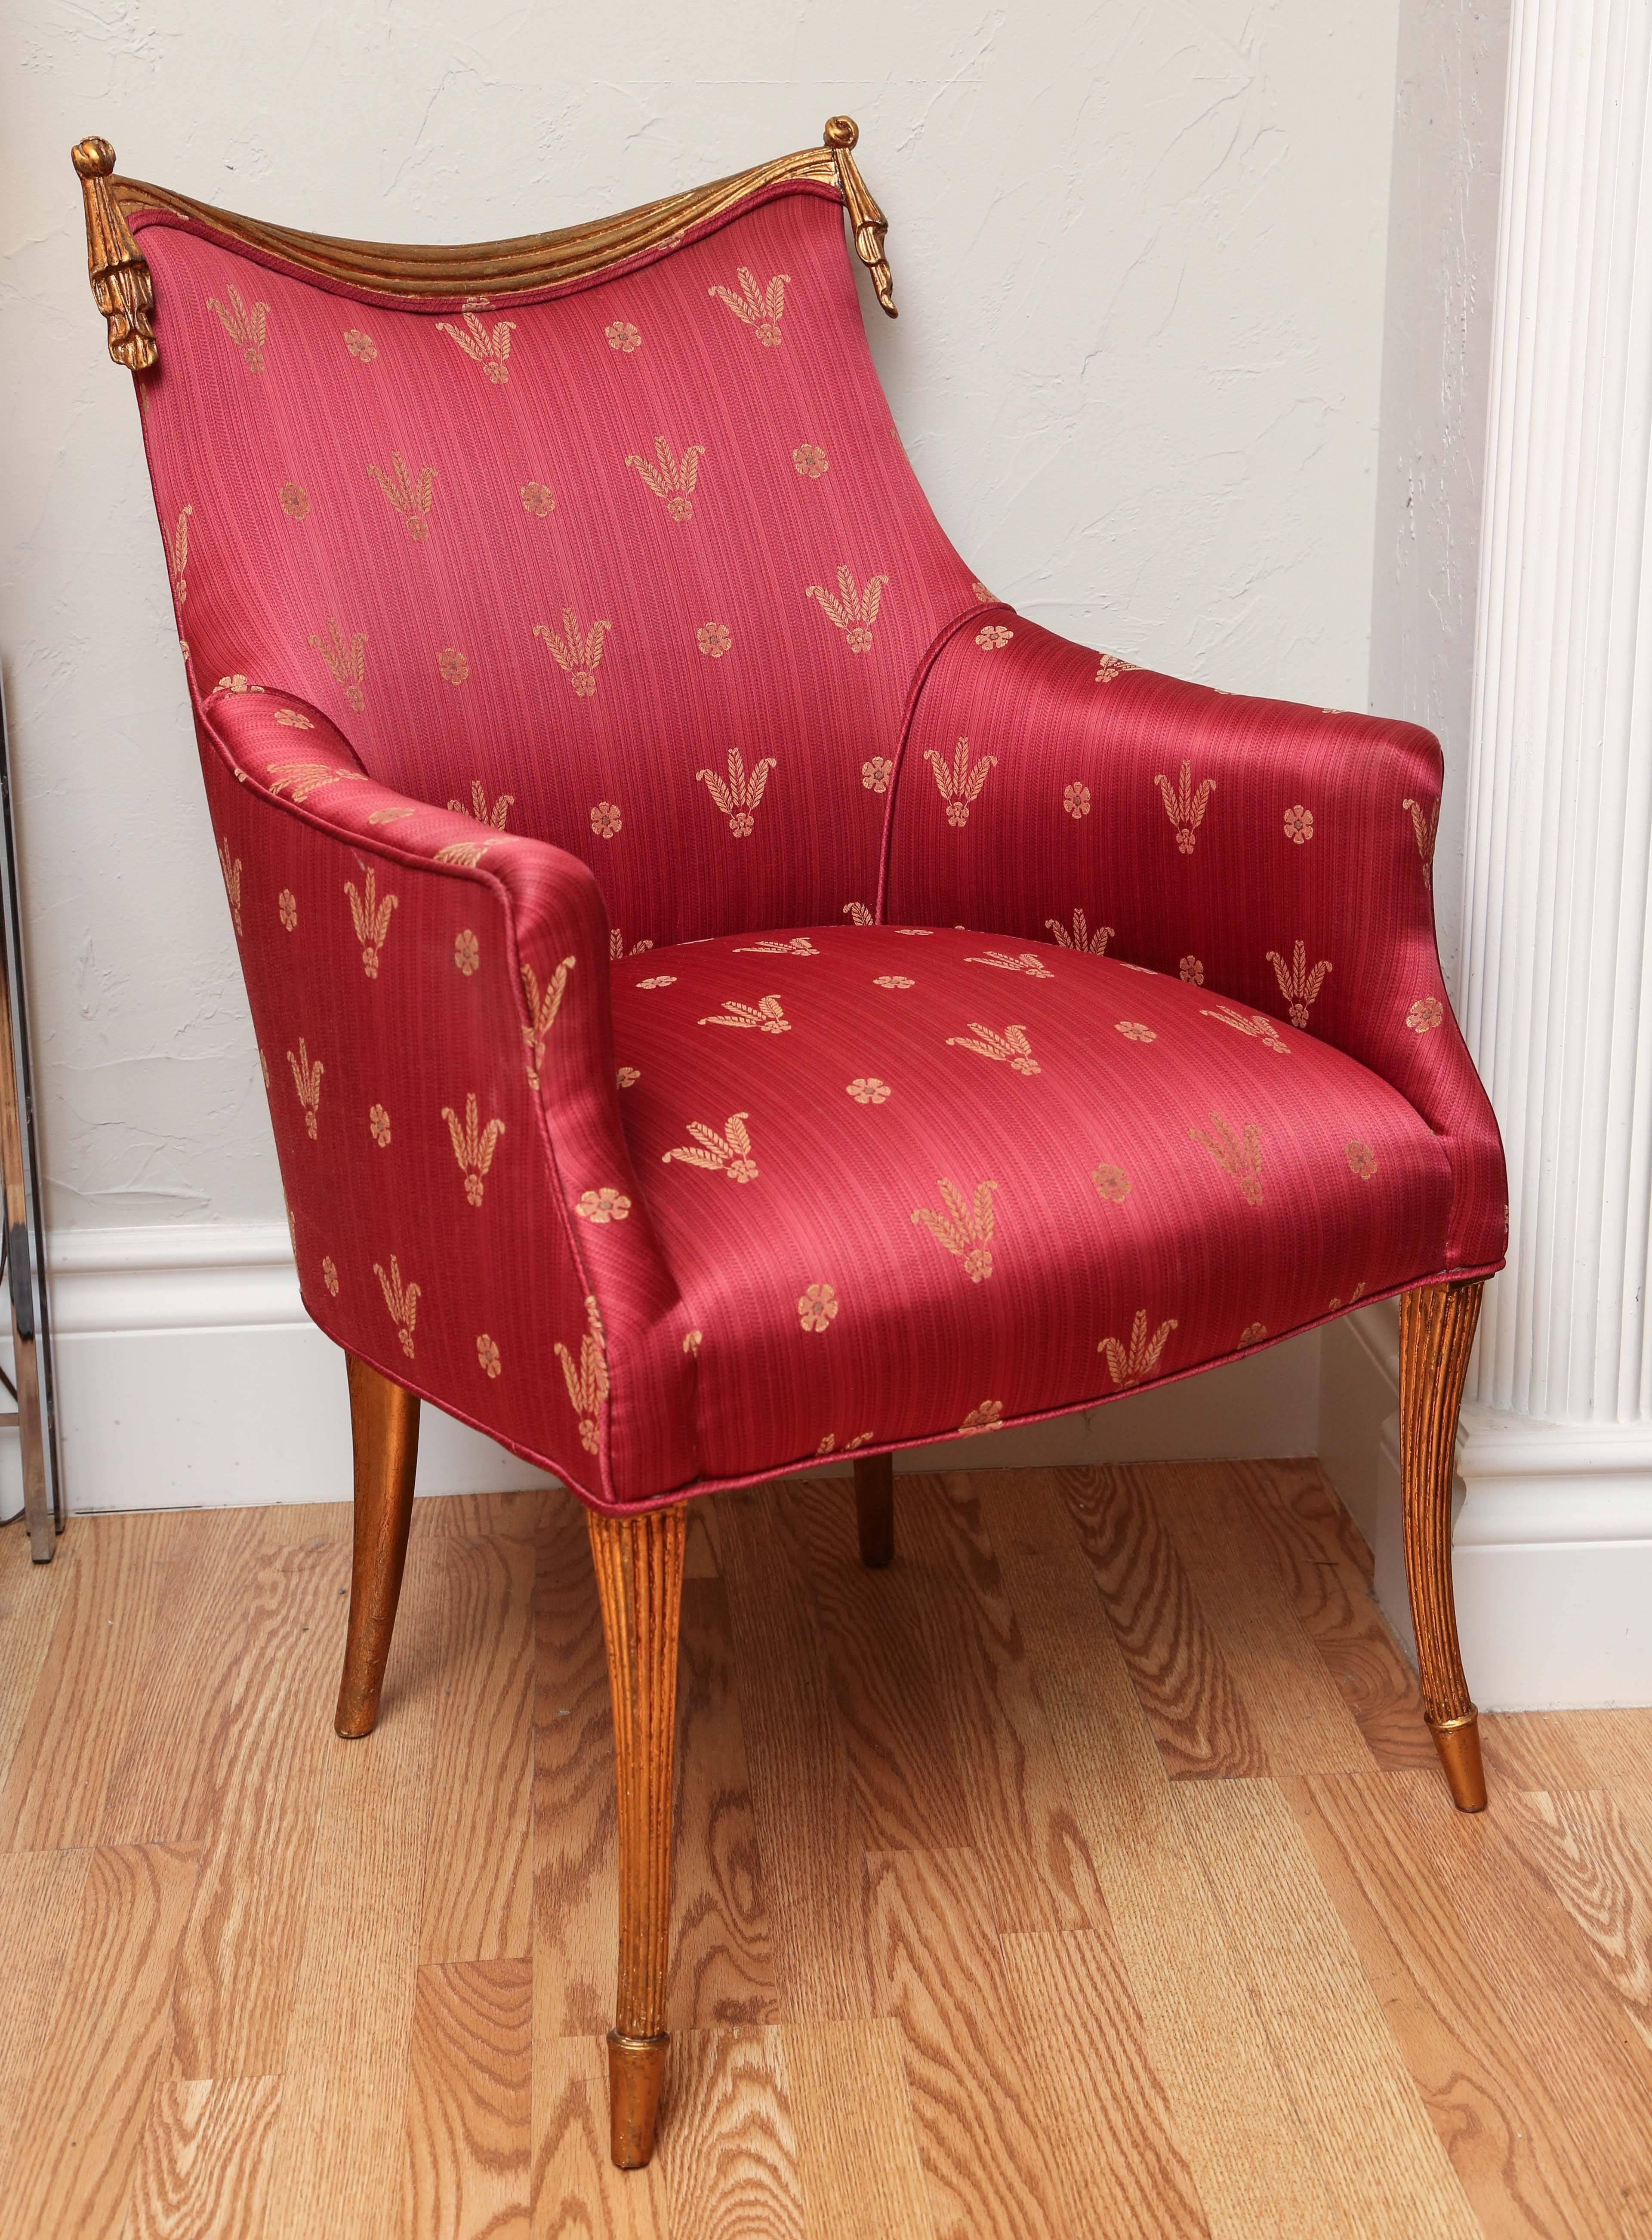 Elegant pair of carved and gilded wood frame Hollywood Regency armchairs. Upholstered in red and gold silk with the Duke of Windsor's three feathers design.